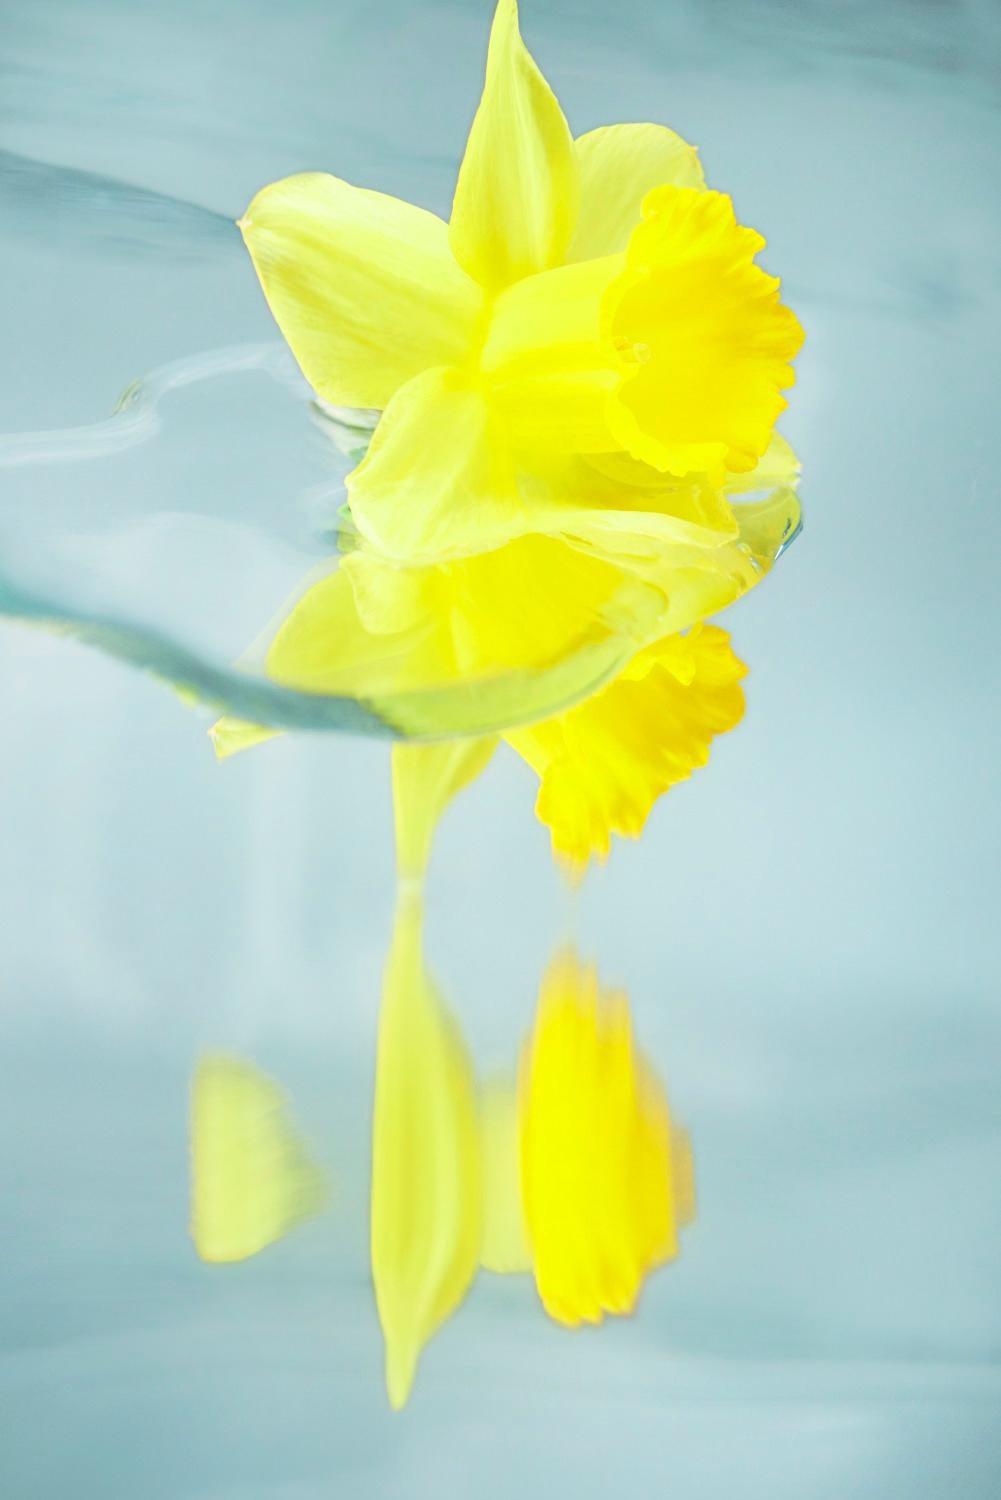 Sophie Delaporte Color Photograph - Flowers#29, yellow, water, spring, flower